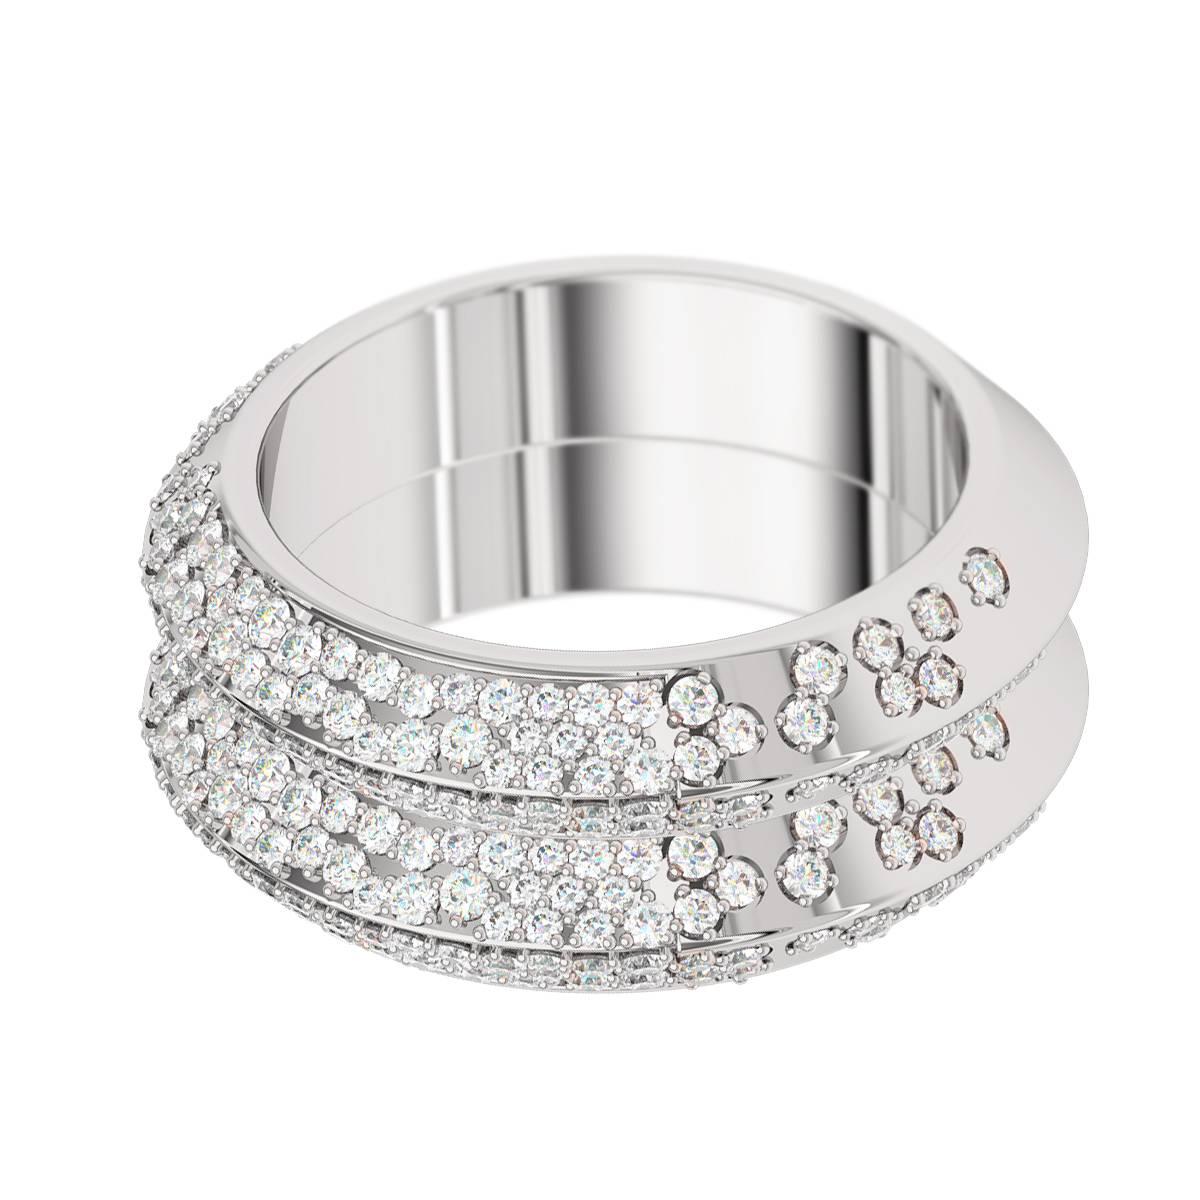 This elegant diamond pave eternity band ring is handcrafted in Sydney in 18 karat white gold, and set with 1.6 carats of top quality diamonds. The knife edge design of the double band is contemporary and timeless. This beautiful ring would make a